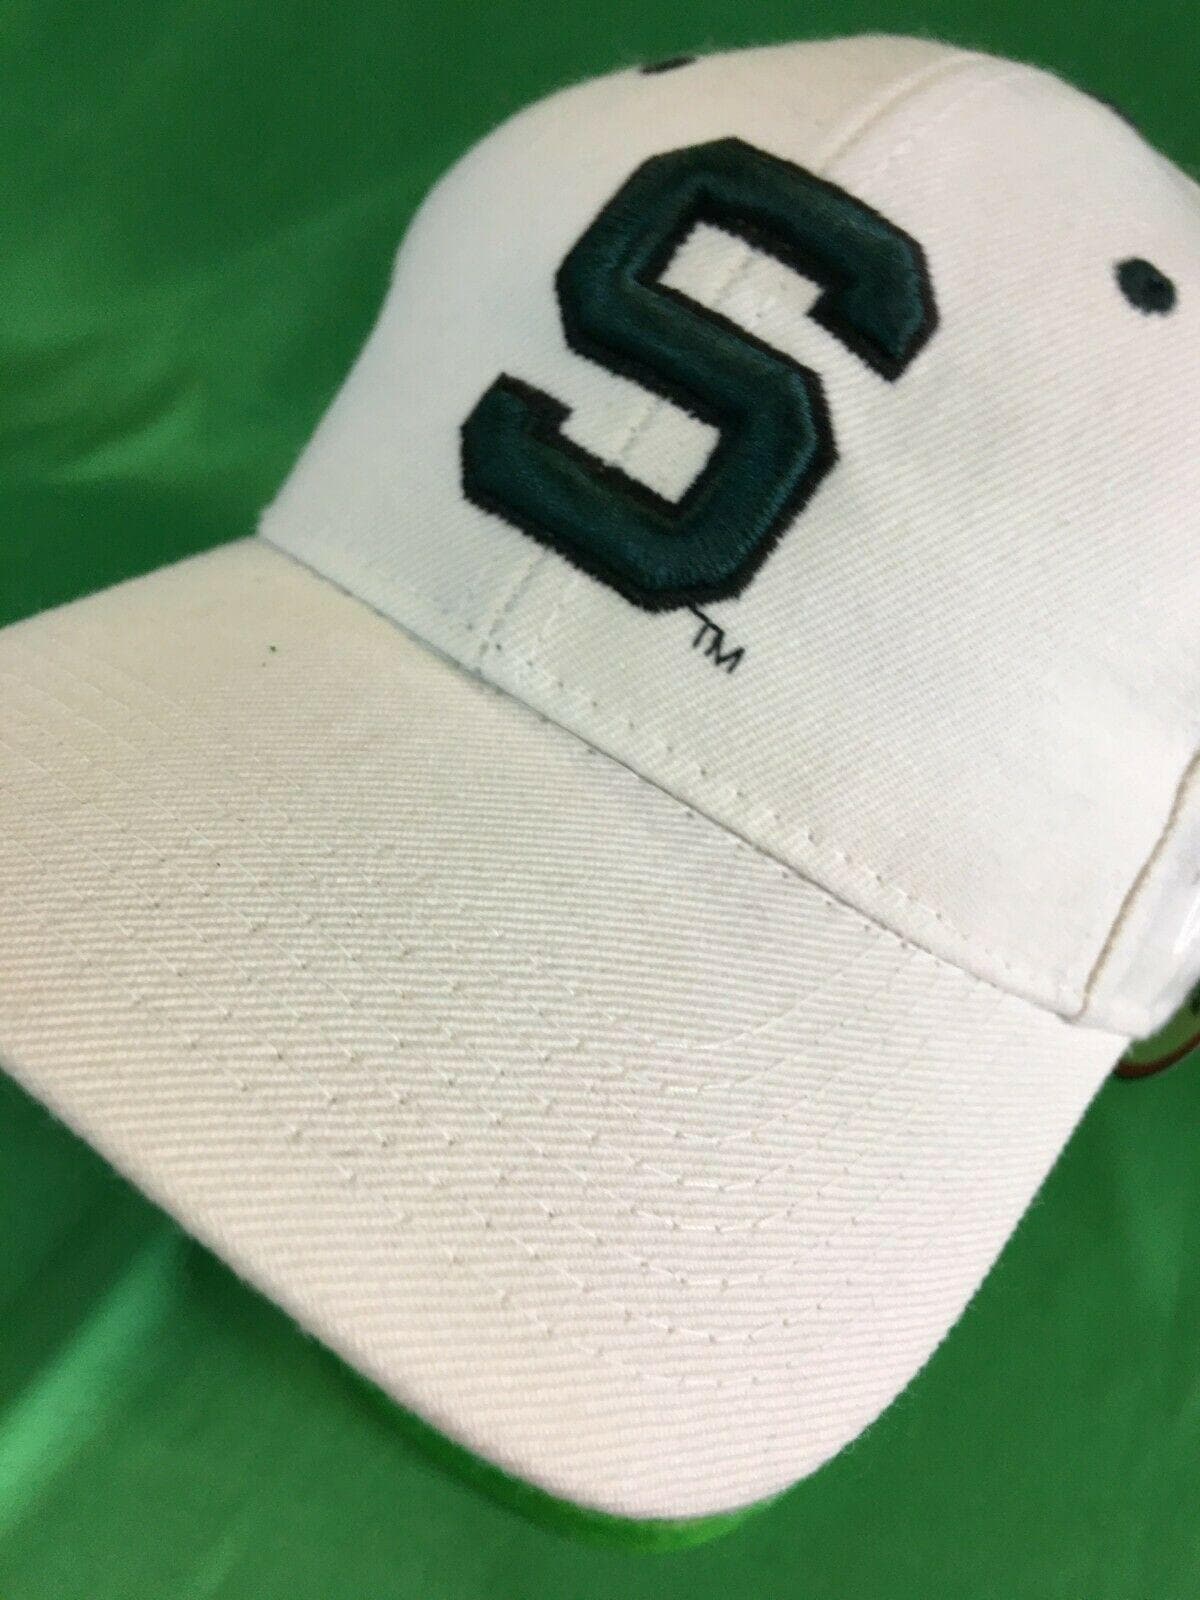 NCAA Michigan State Spartans Zephyr White Youth Hat/Cap 6-7/8 NWT